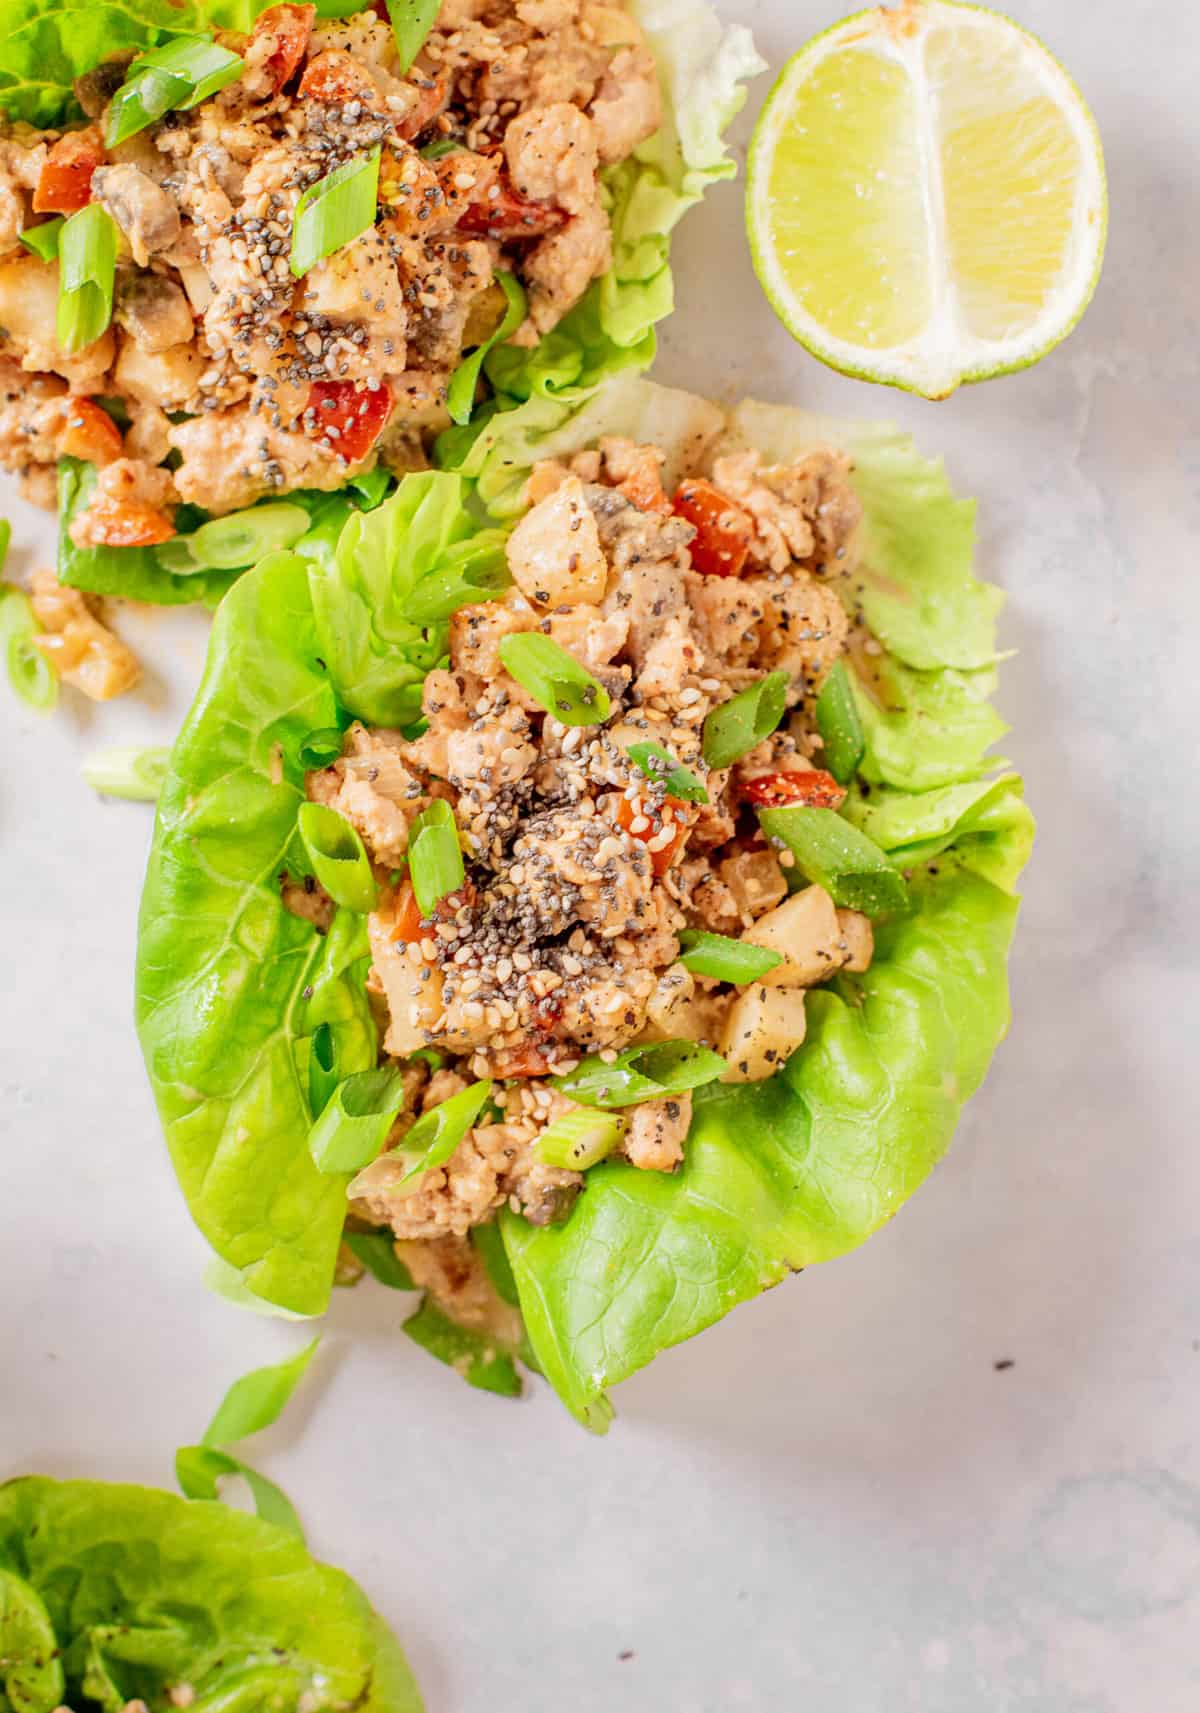 Two chicken lettuce wraps are placed next to a slice of lime.